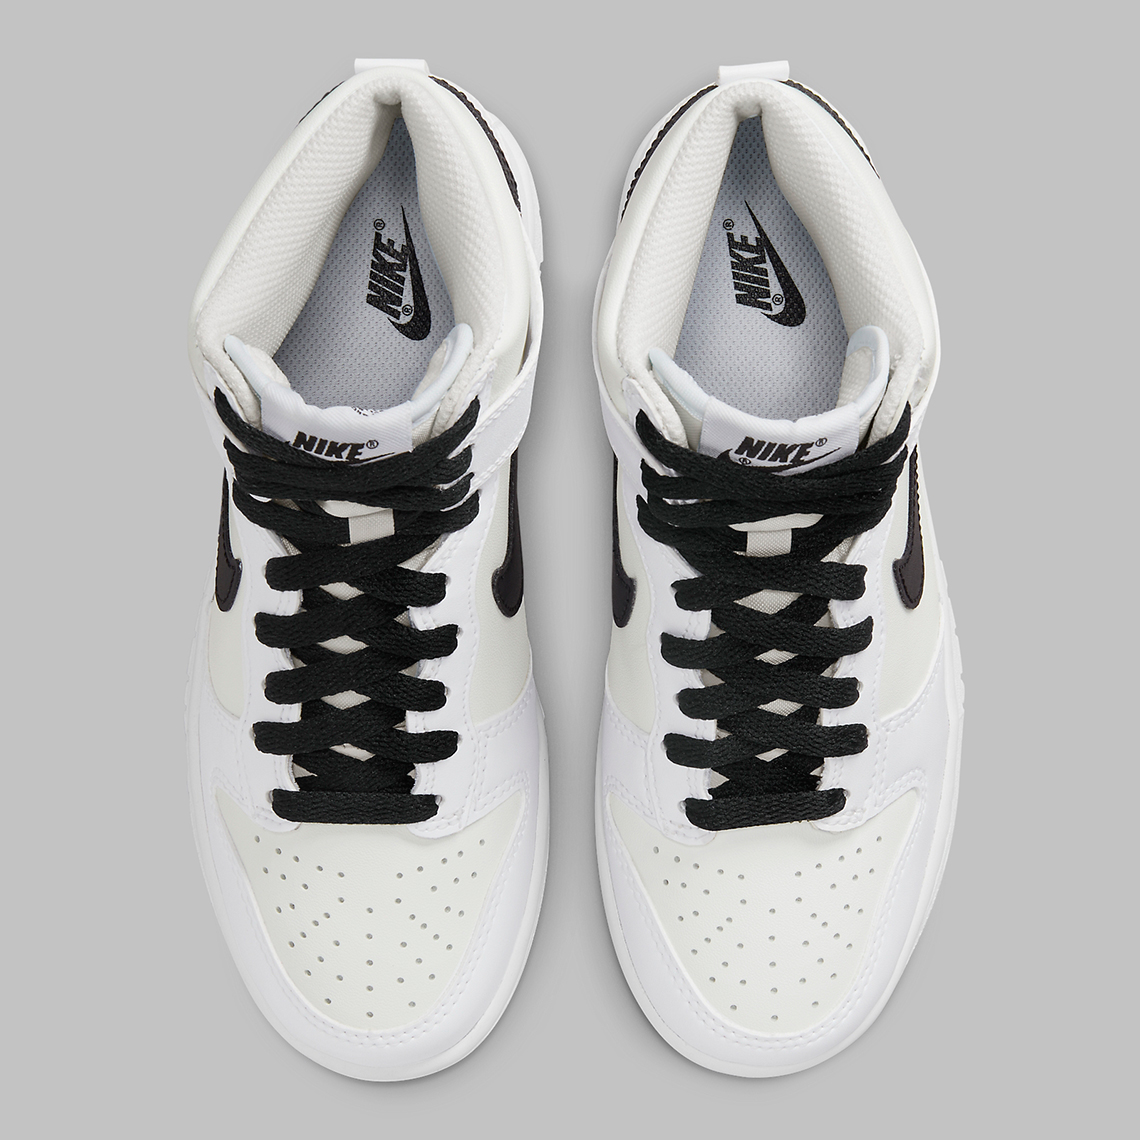 nike dunks cheap online women boots in india Gs White Black Db2179 108 Release Date 8